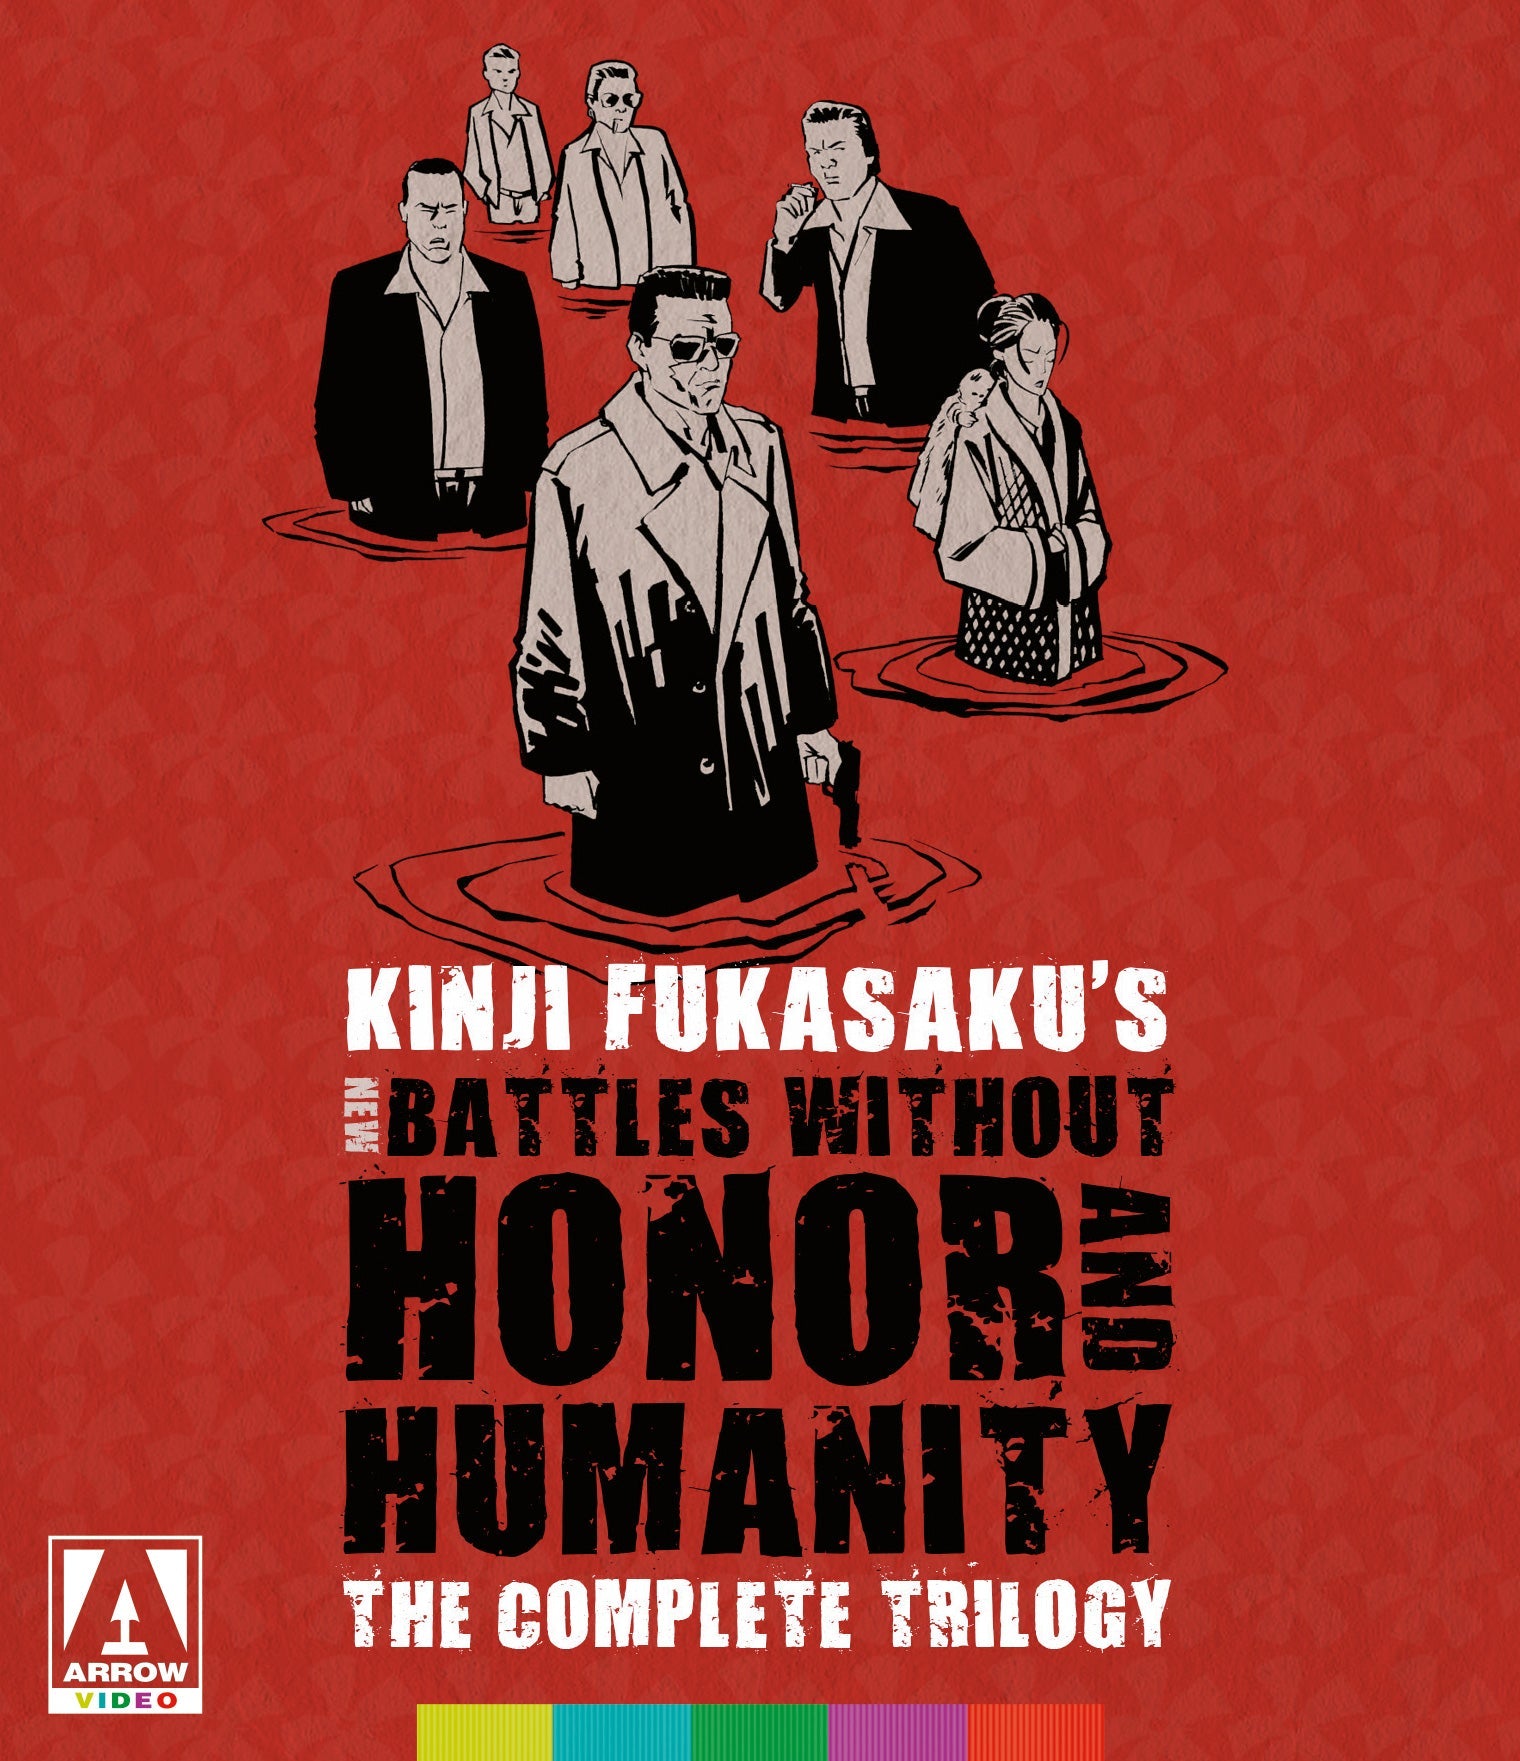 New Battles Without Honor And Humanity: The Complete Trilogy Blu-Ray Blu-Ray